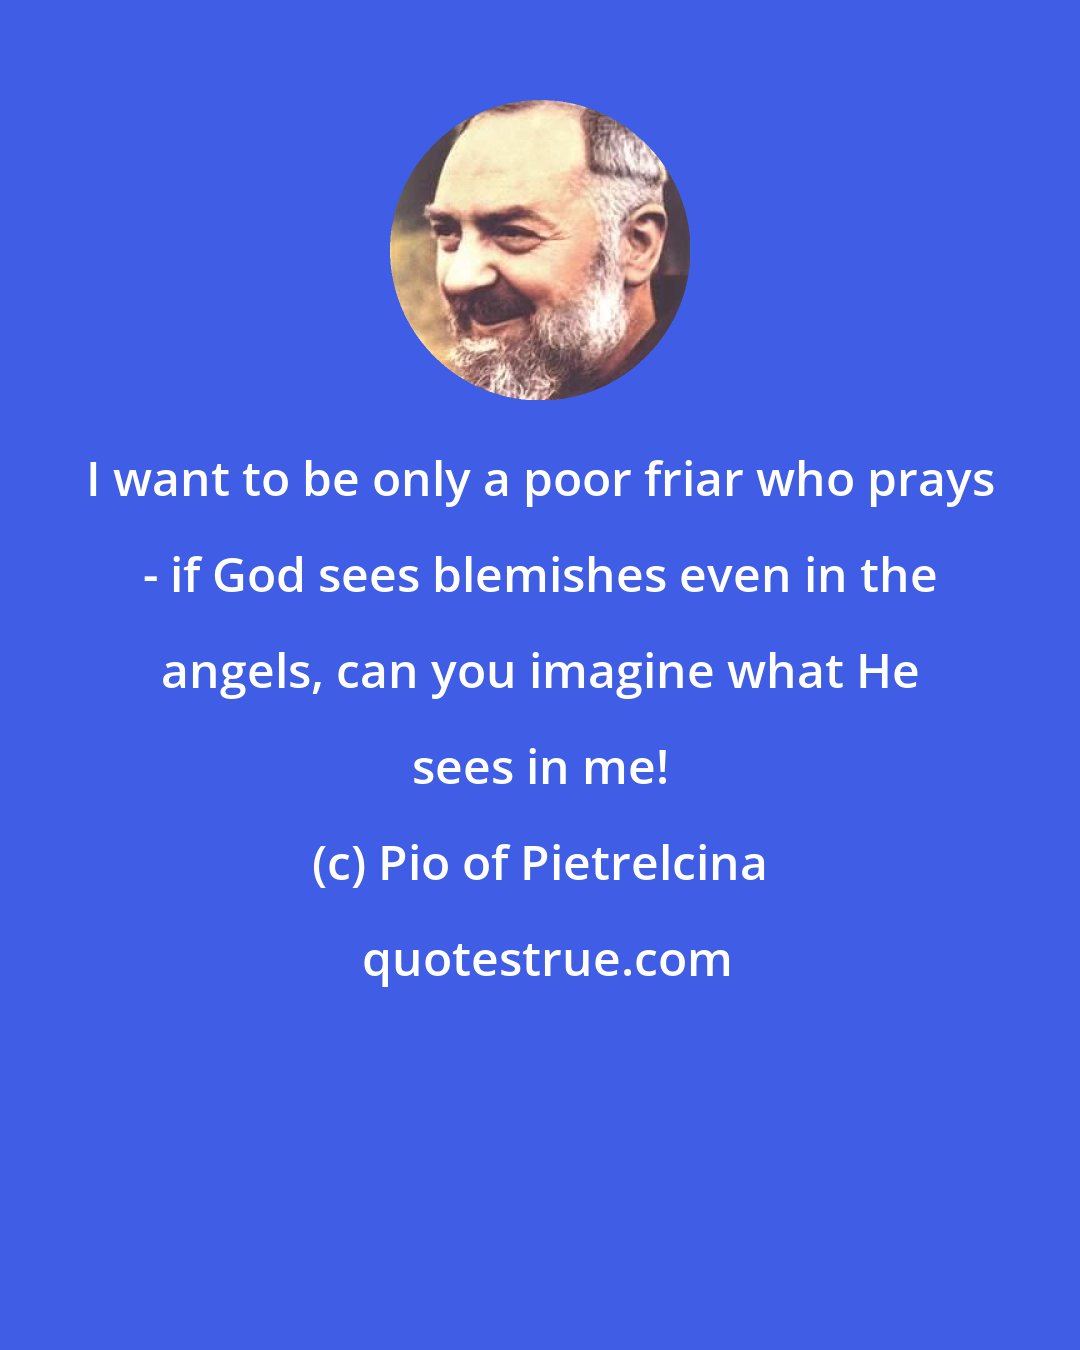 Pio of Pietrelcina: I want to be only a poor friar who prays - if God sees blemishes even in the angels, can you imagine what He sees in me!